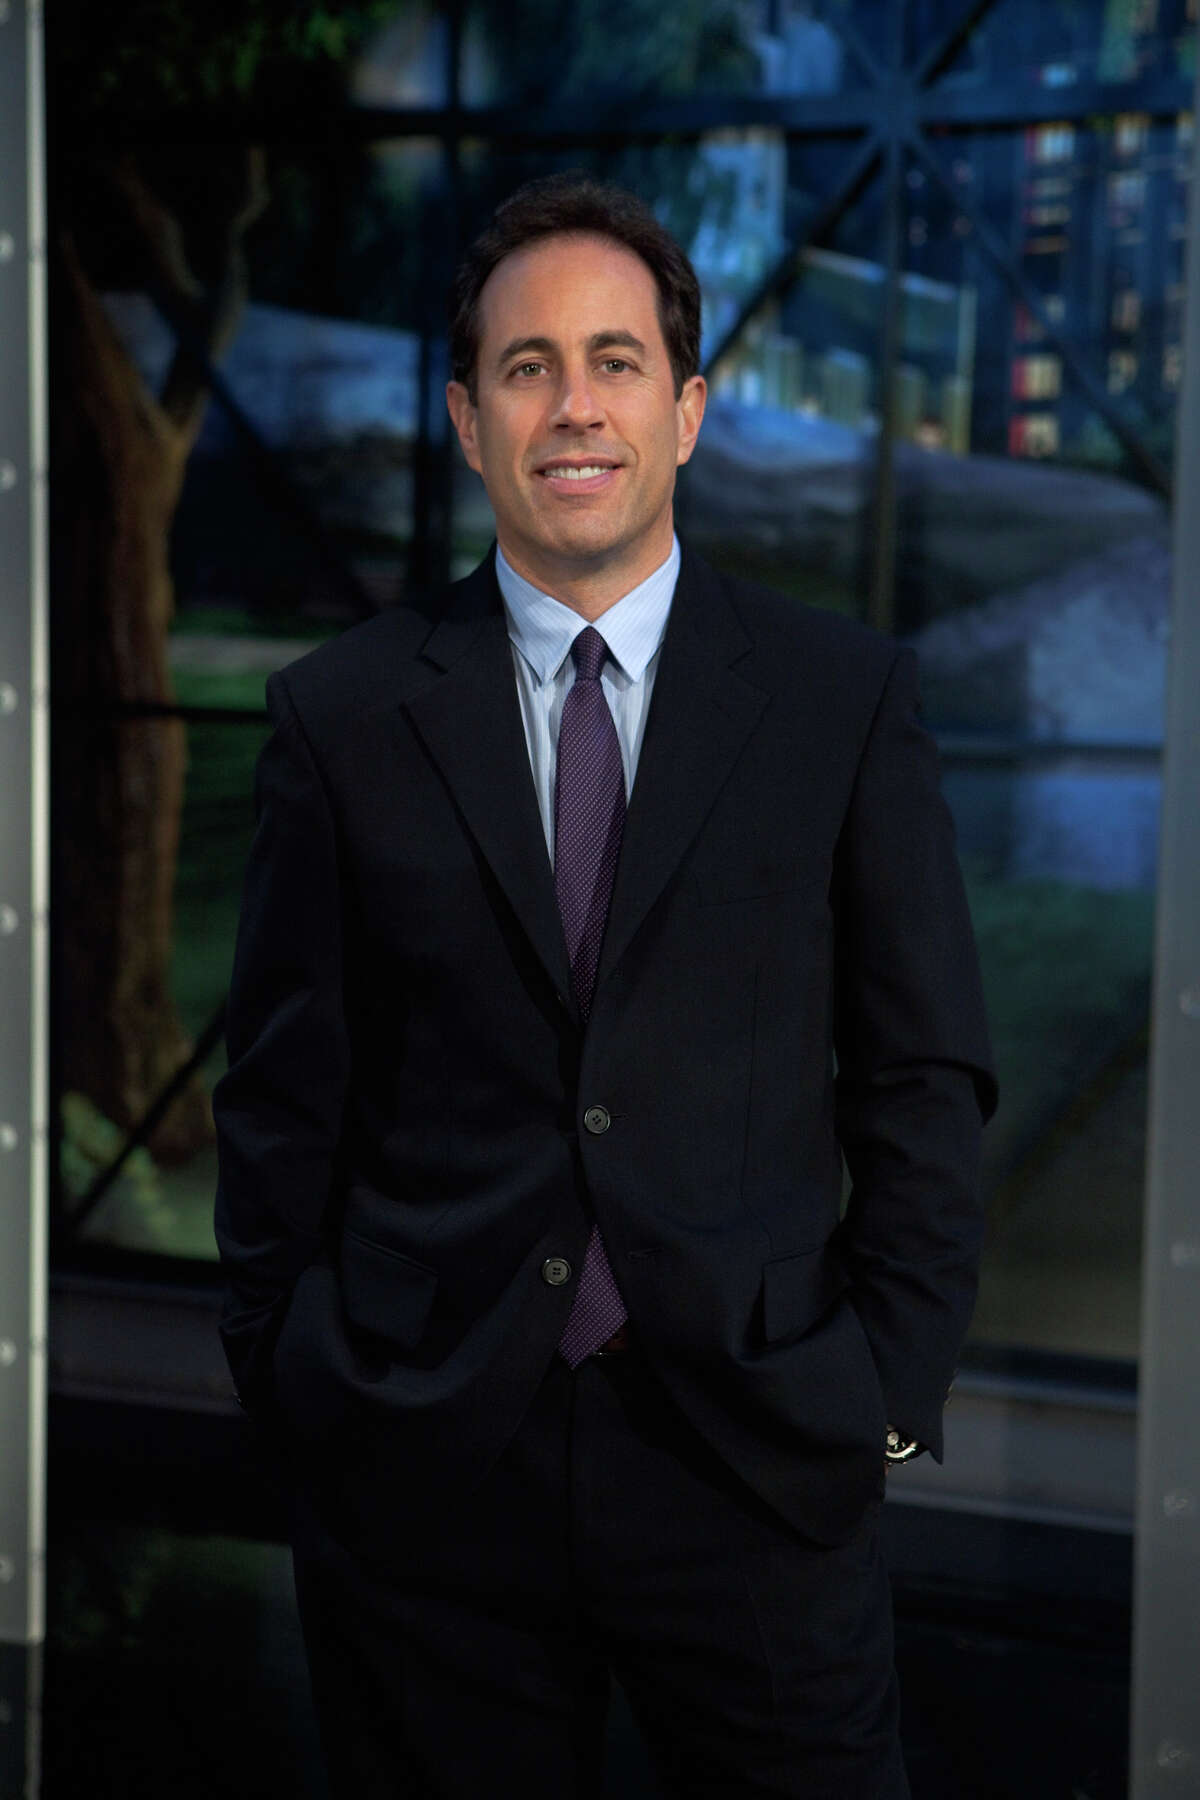 Jerry Seinfeld draws from his kids and home life for much of his current comedy. PATRICK HABRON / NBC